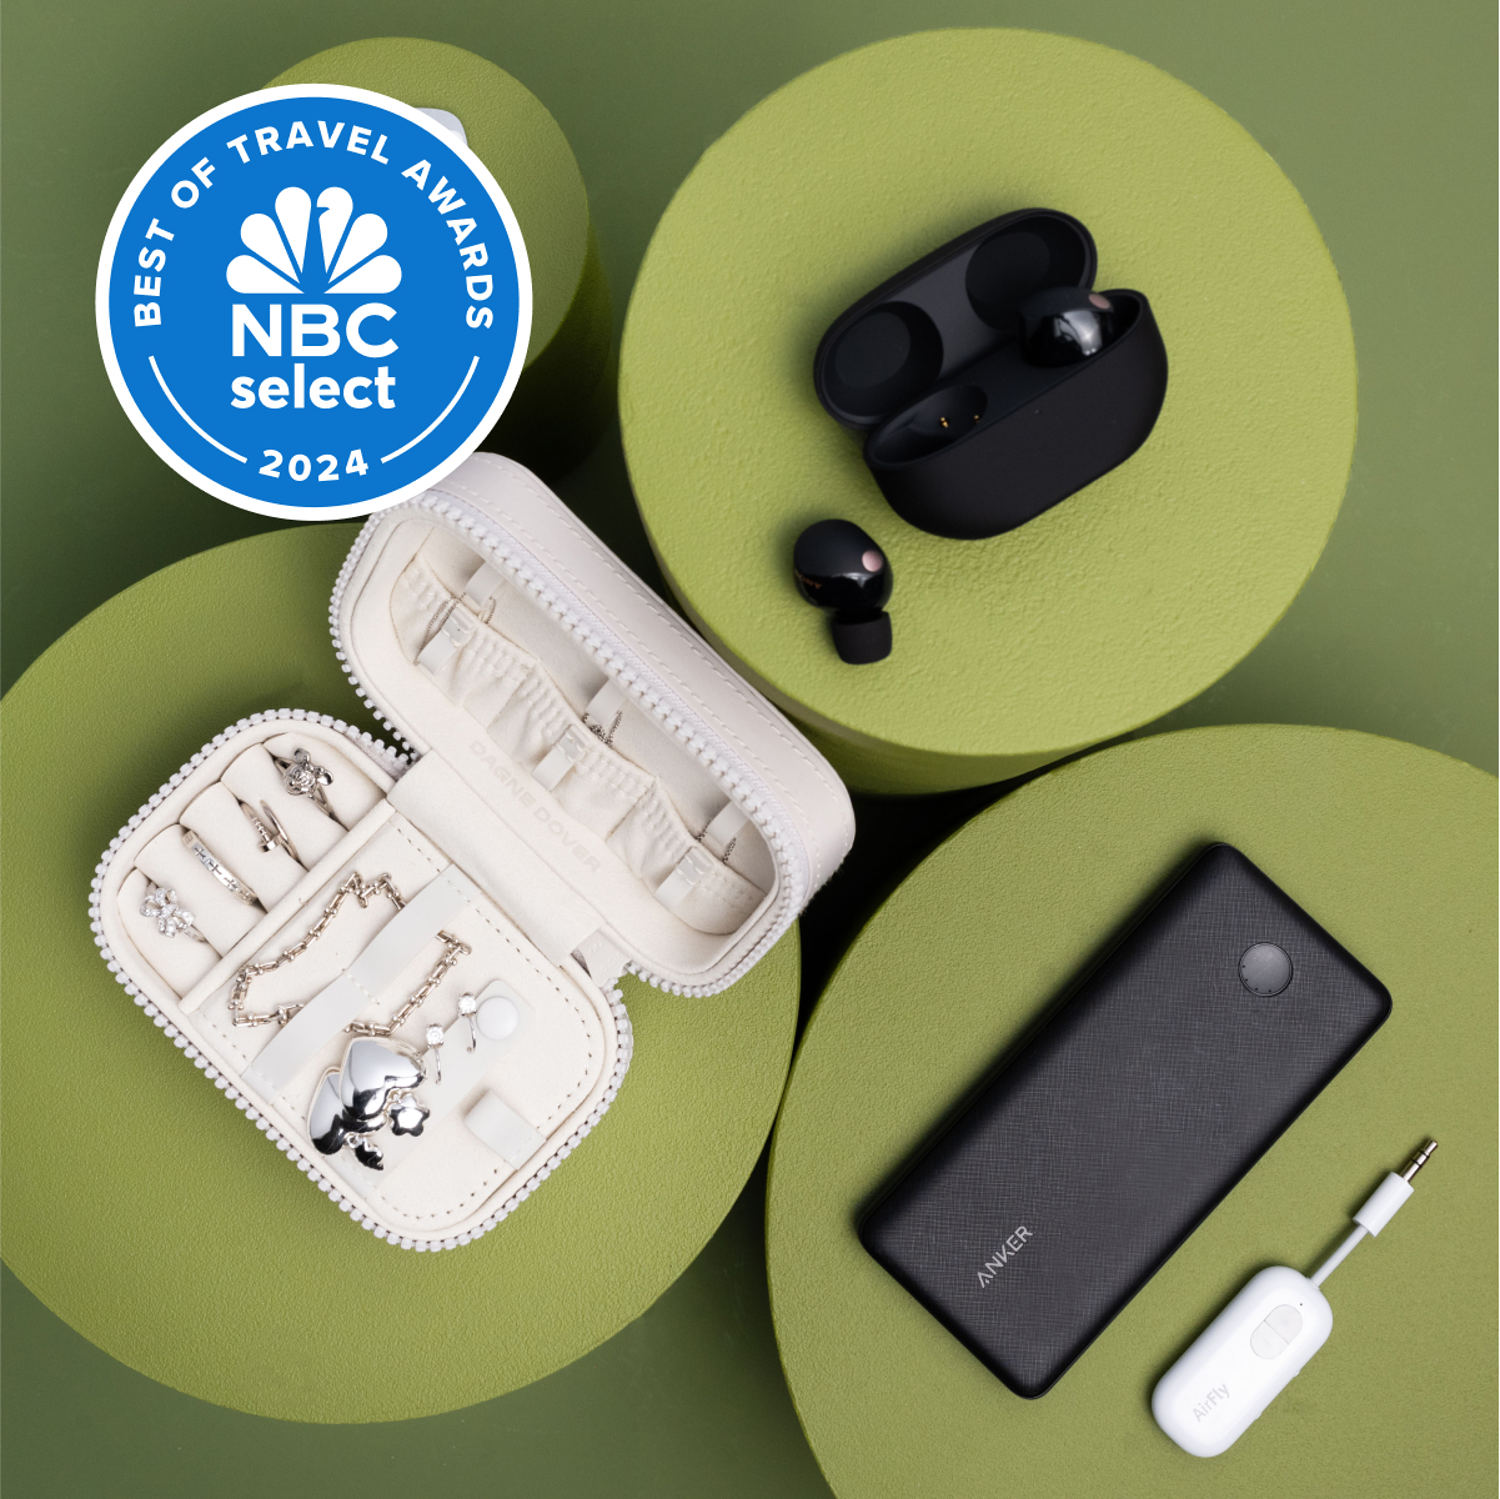 NBC Select Travel Awards: The best accessories of 2024